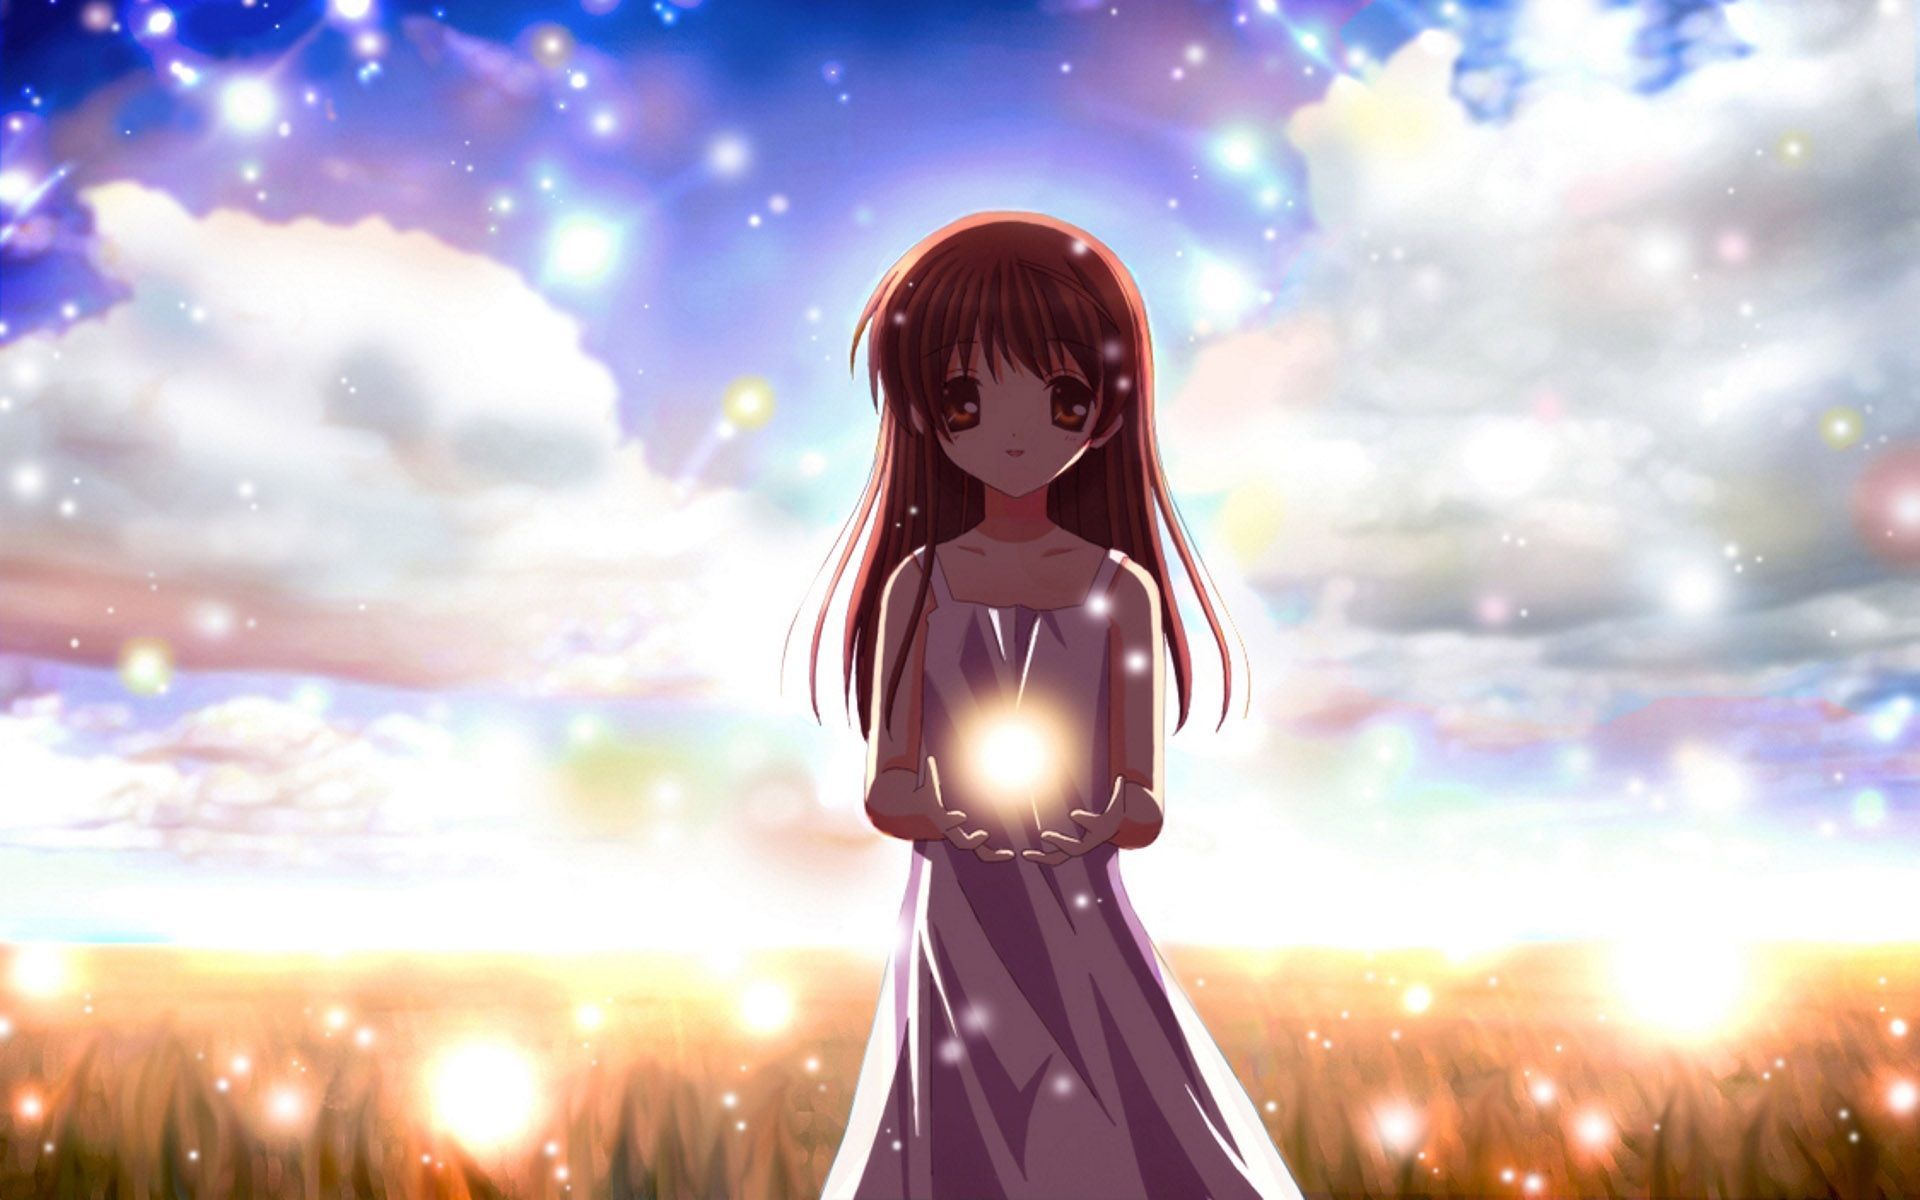 Planetary Update from the Internal Realms. Clannad anime, Clannad